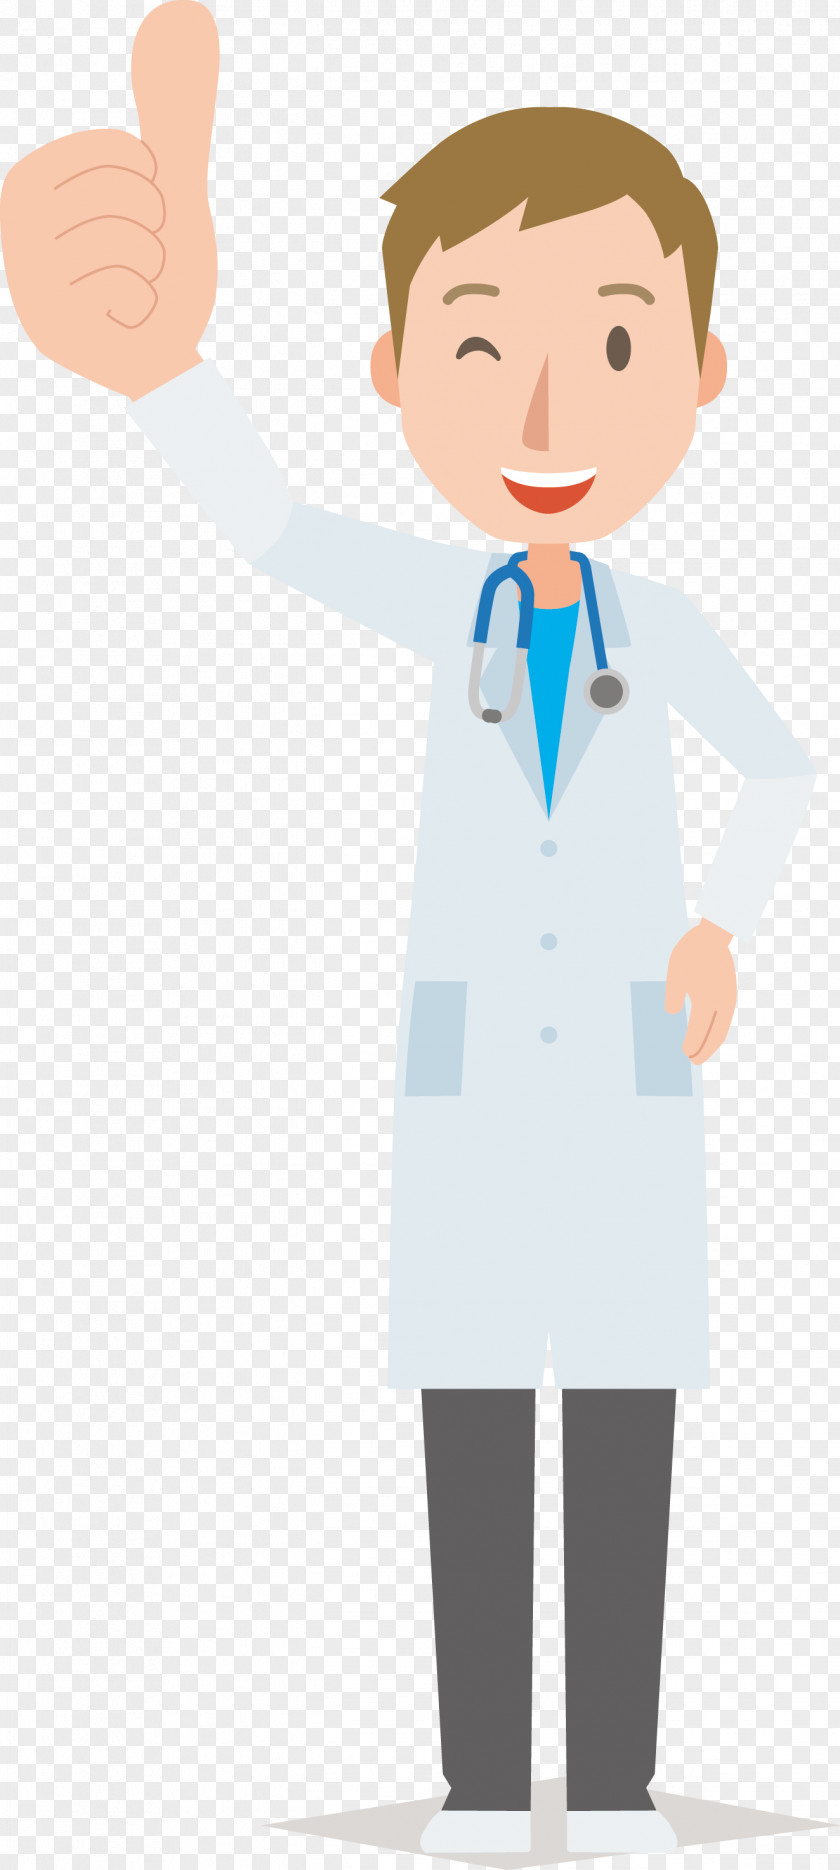 A Thumbs Up Male Doctor Cartoon Icon PNG